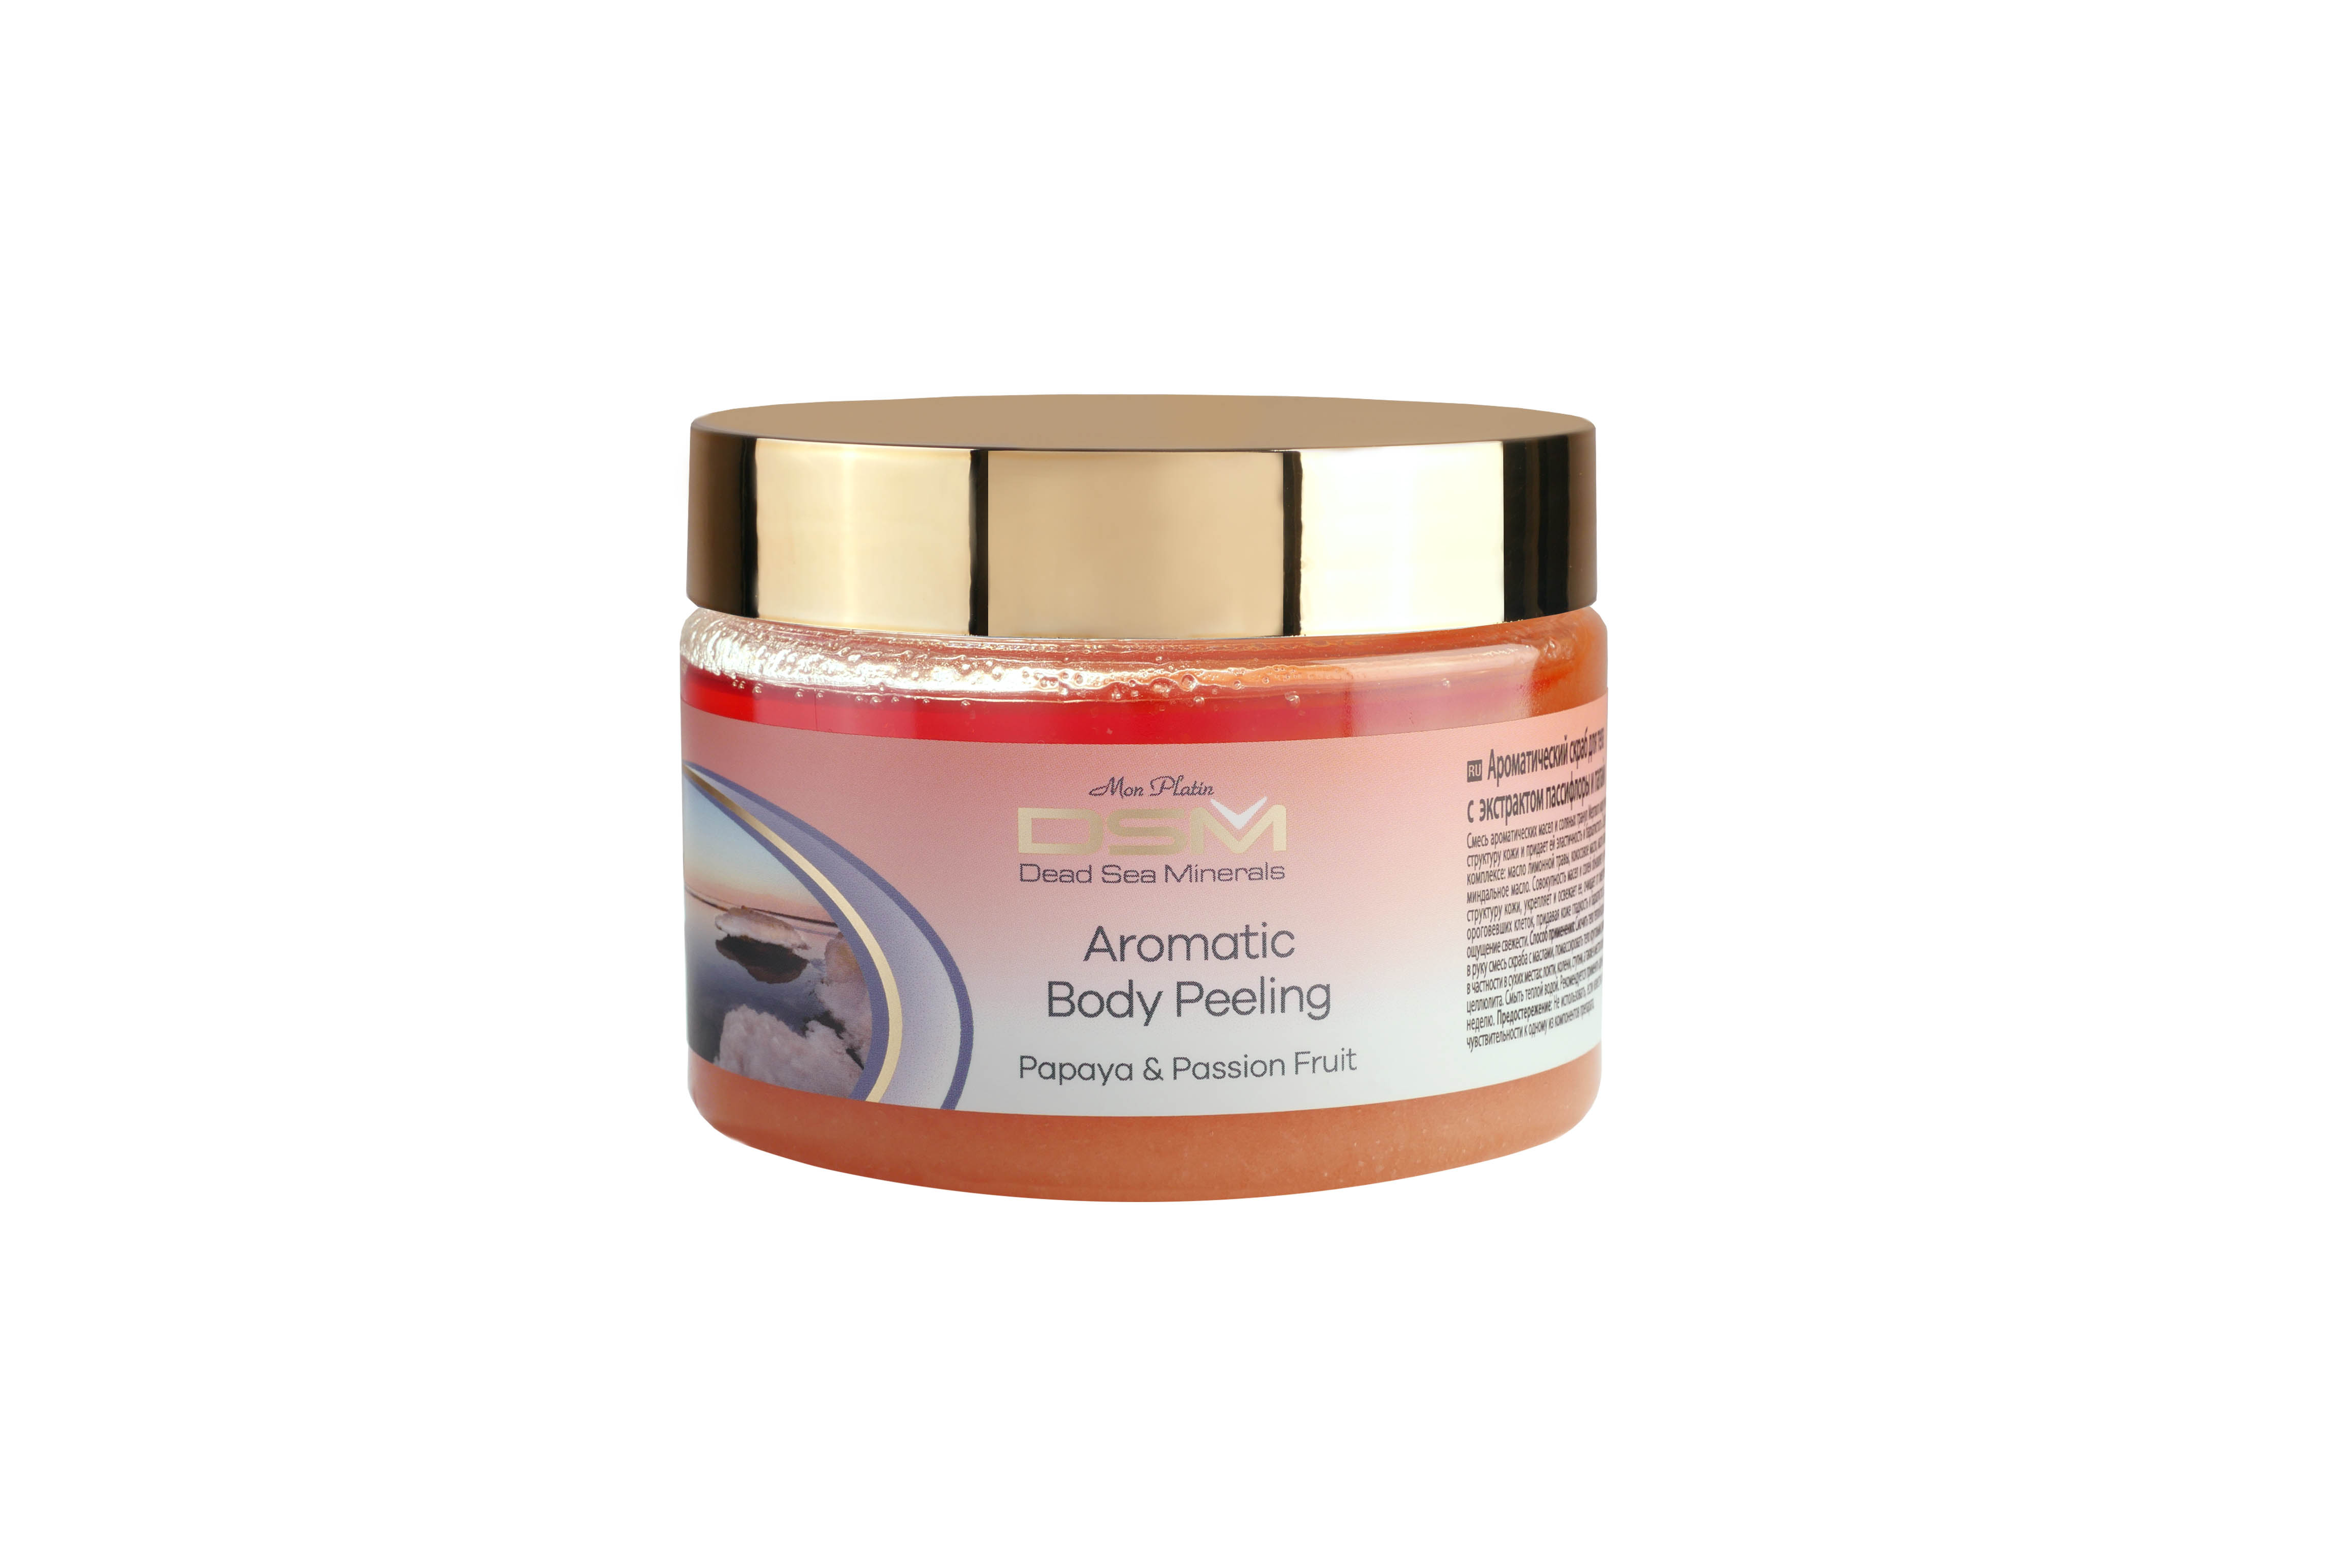 Aromatic Body Peeling scented with fine odors of tropic Papaya and Passion Fruit